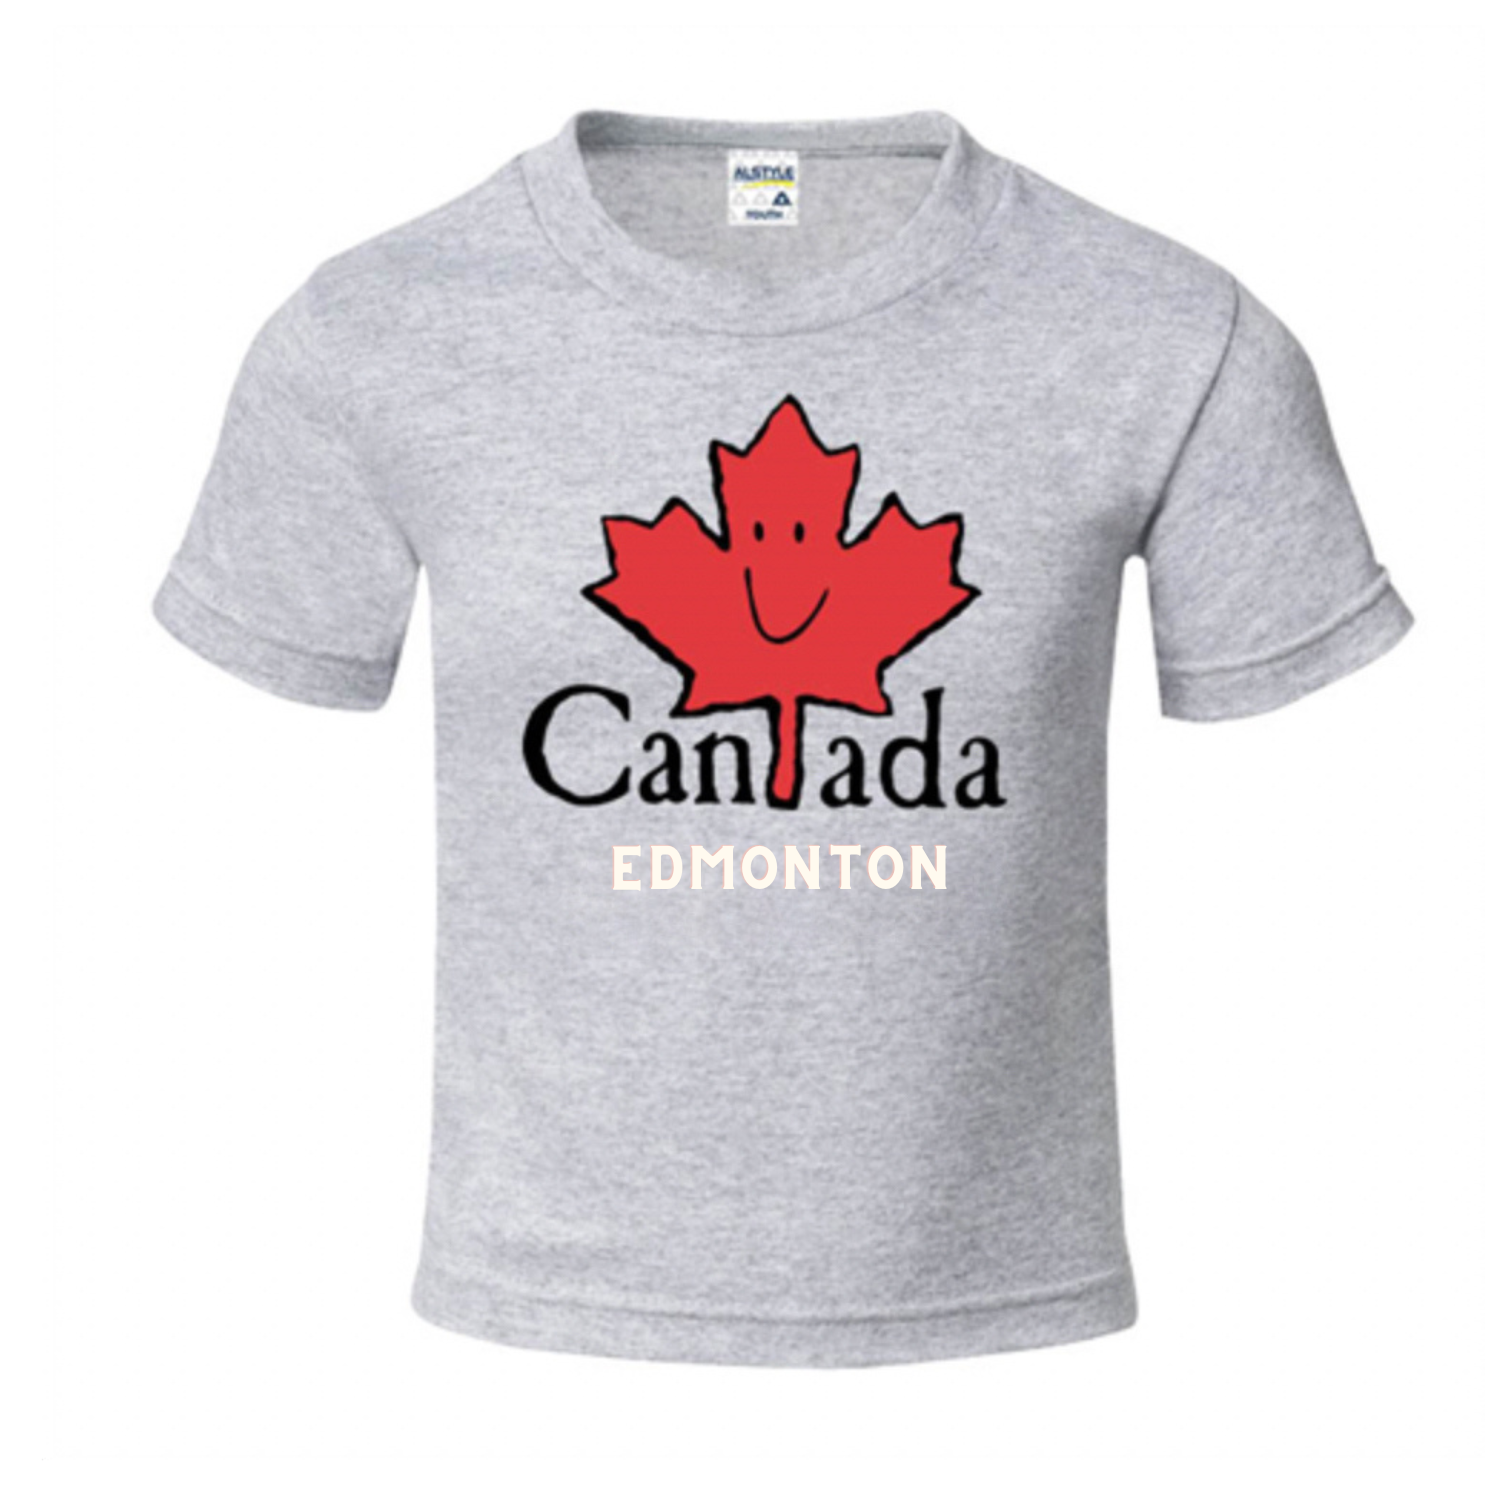 Edmonton T-Shirt for Kids - A cheerful design featuring the Happy Leaf Canada logo